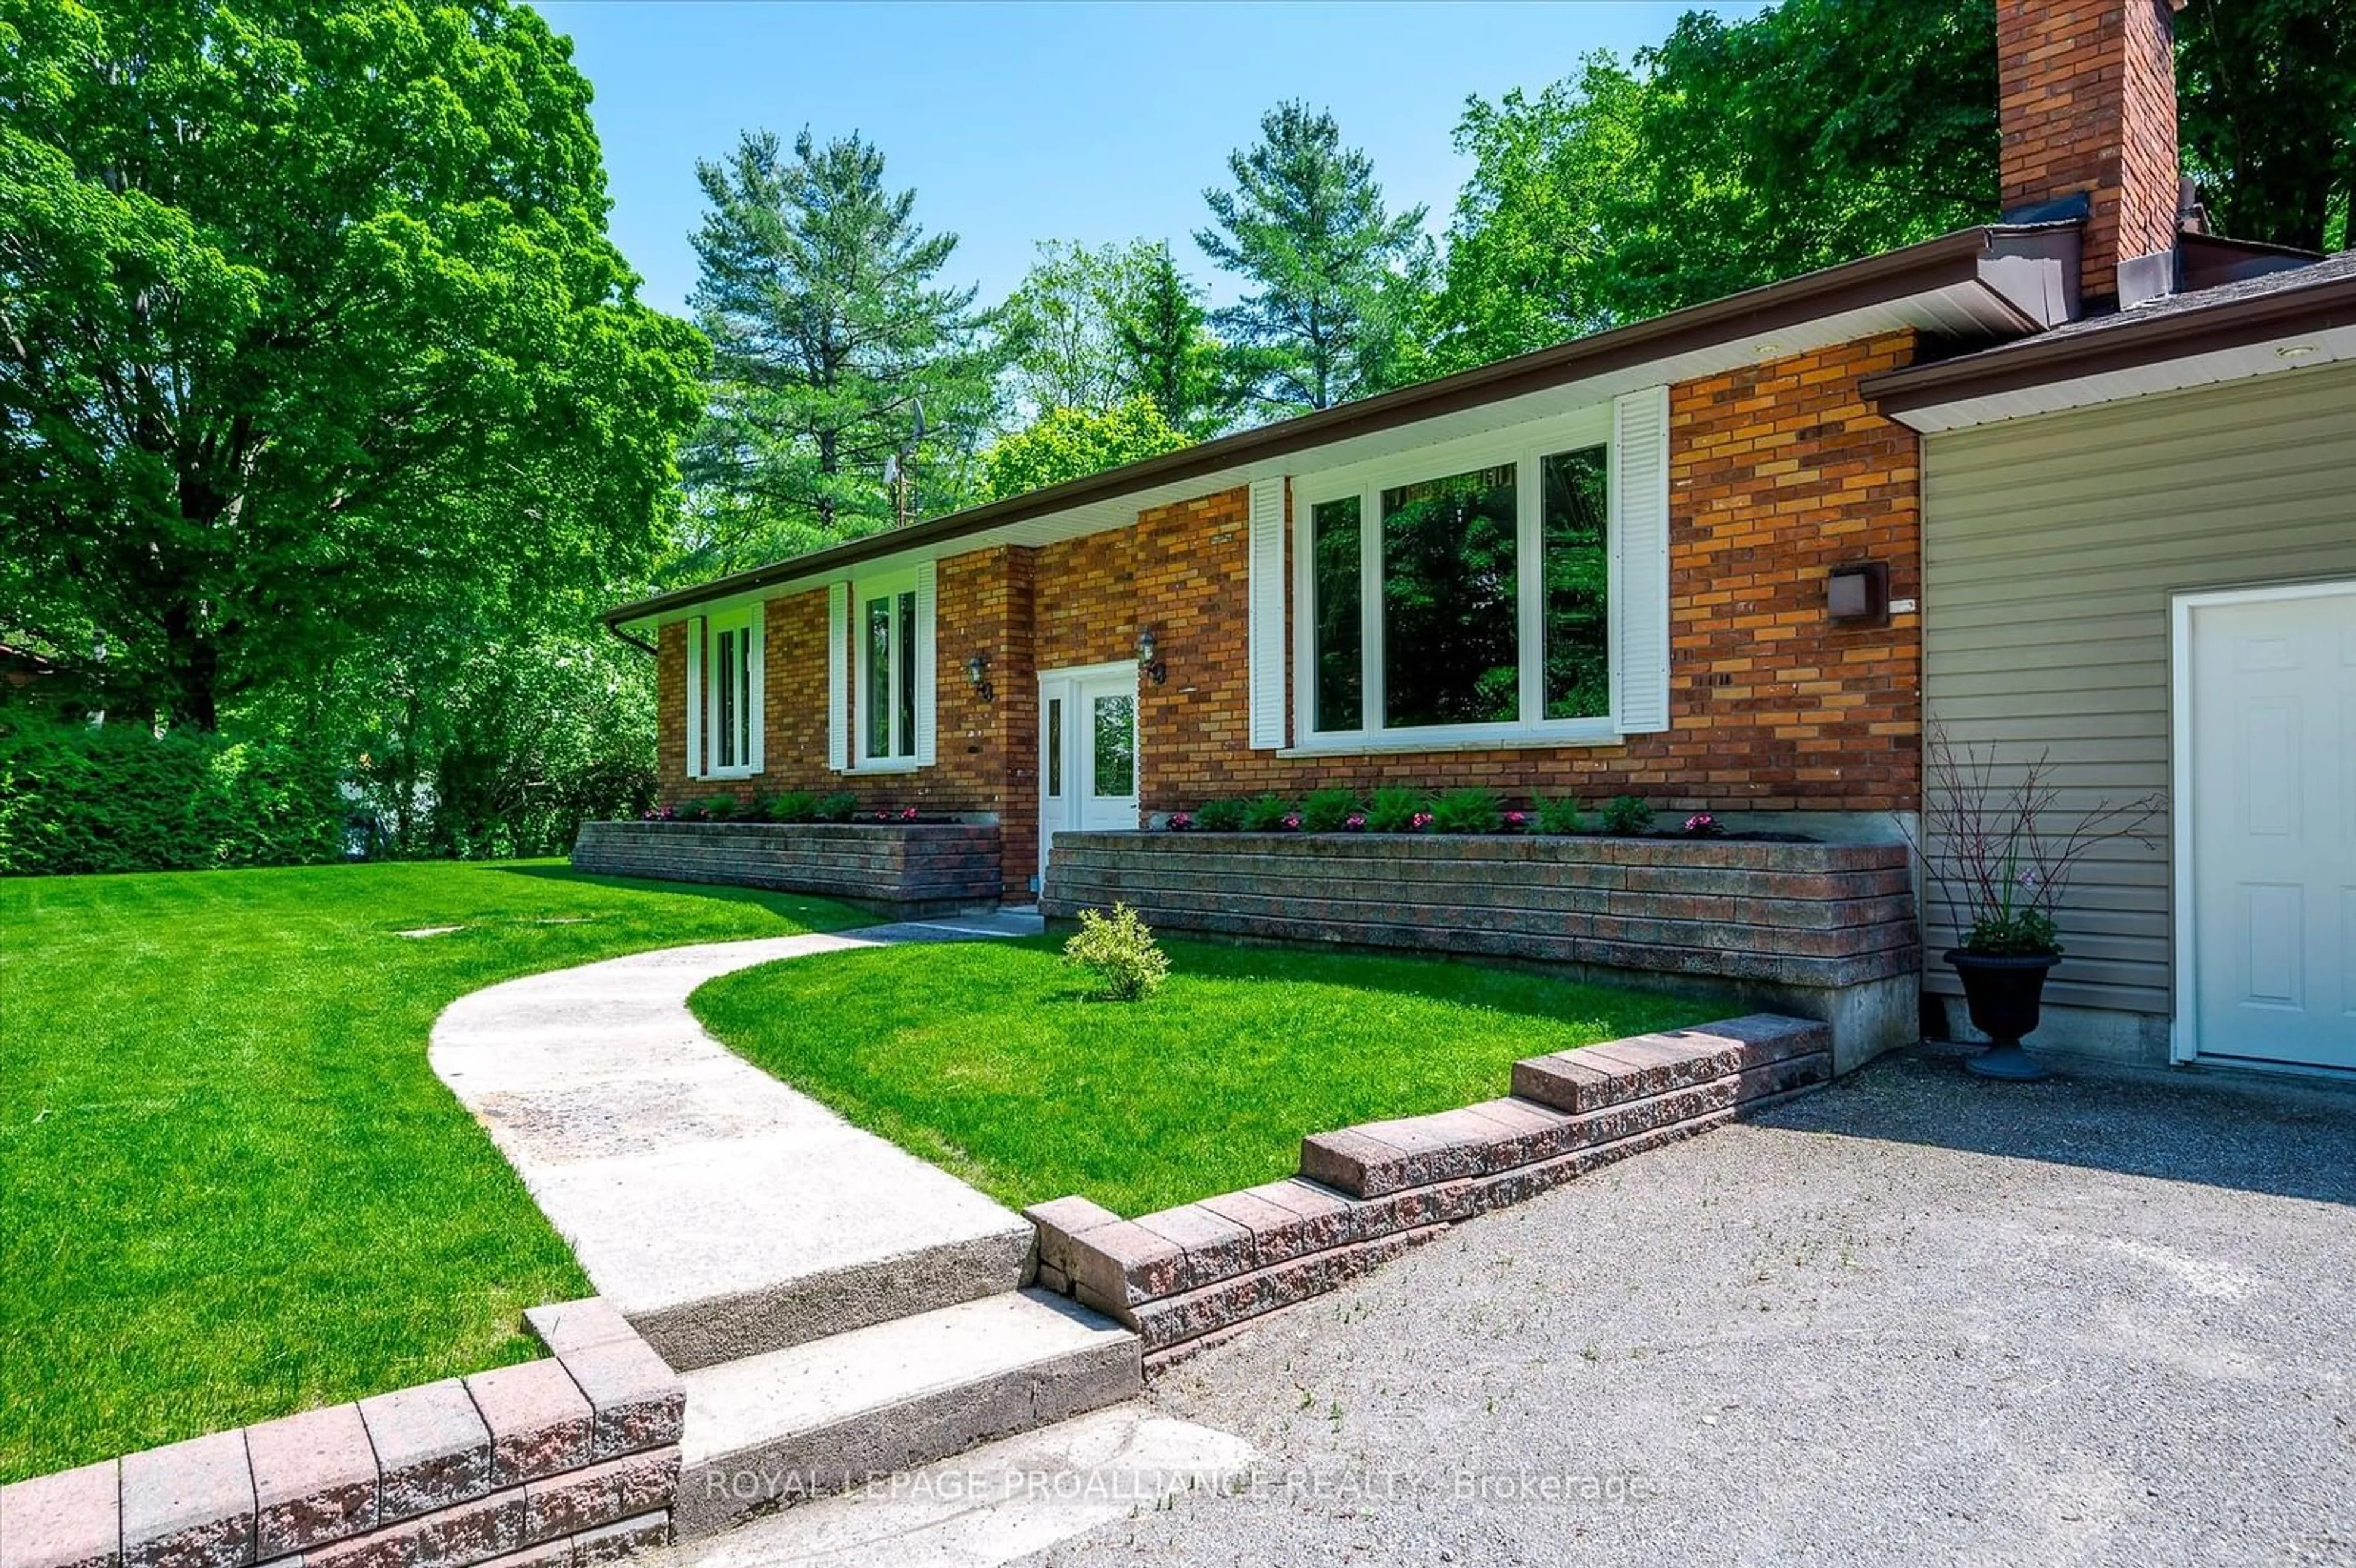 Home with brick exterior material for 1879 10th Line, Smith-Ennismore-Lakefield Ontario K0L 2H0